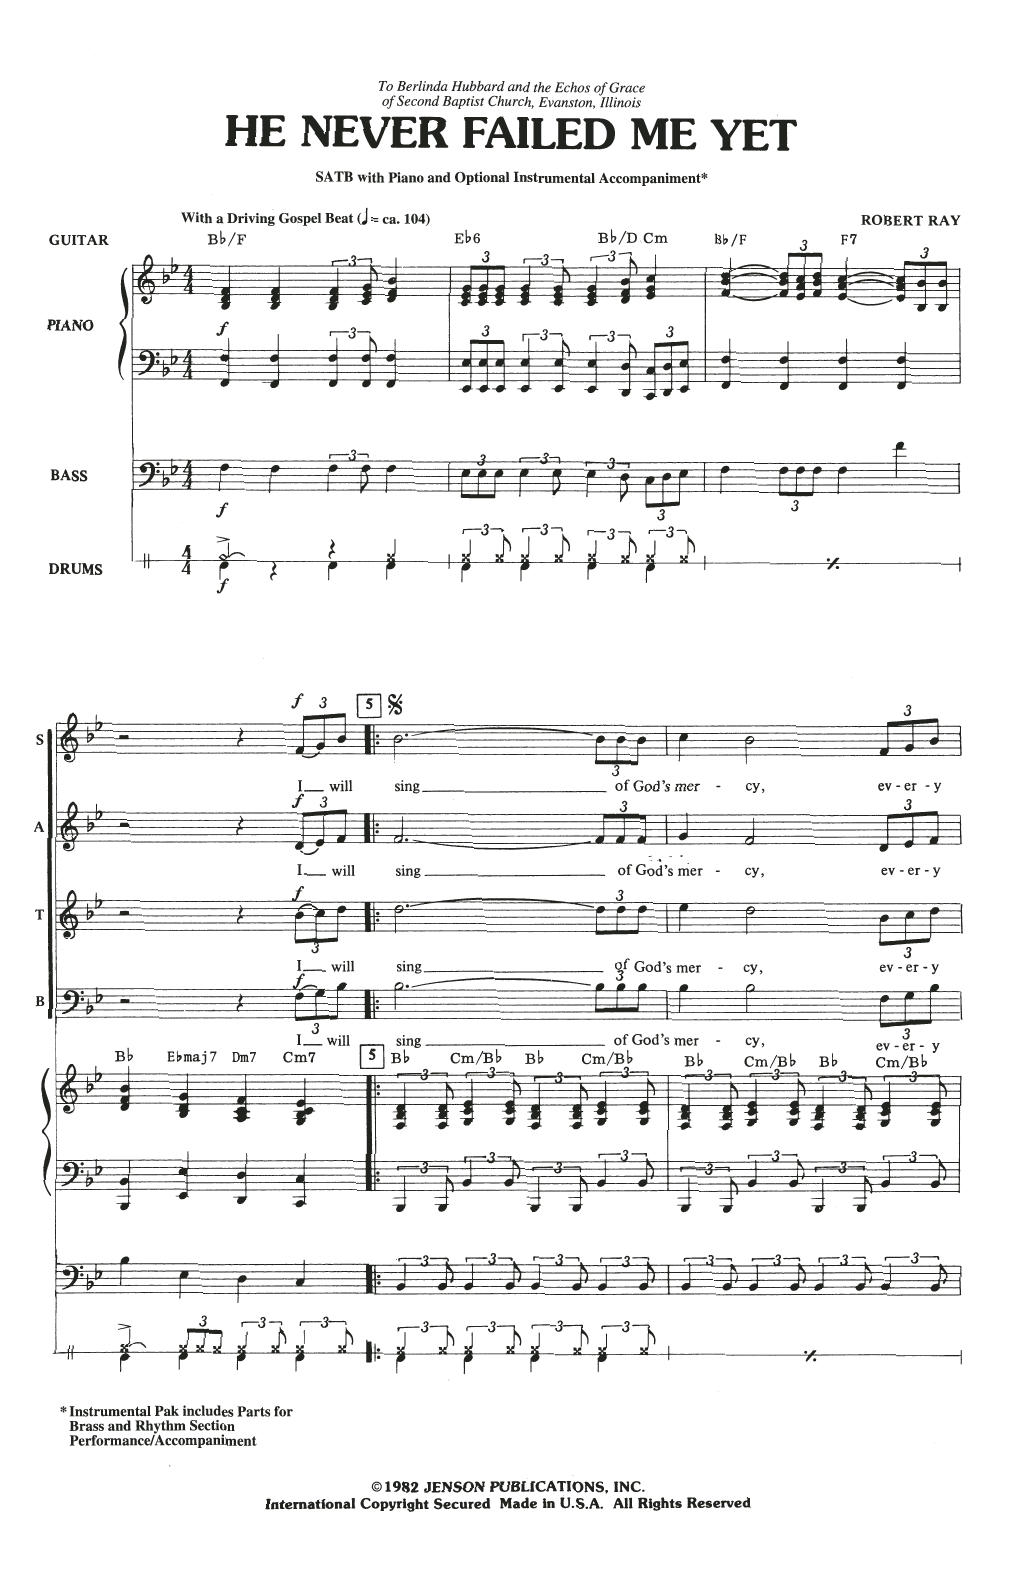 Download Robert Ray He Never Failed Me Yet Sheet Music